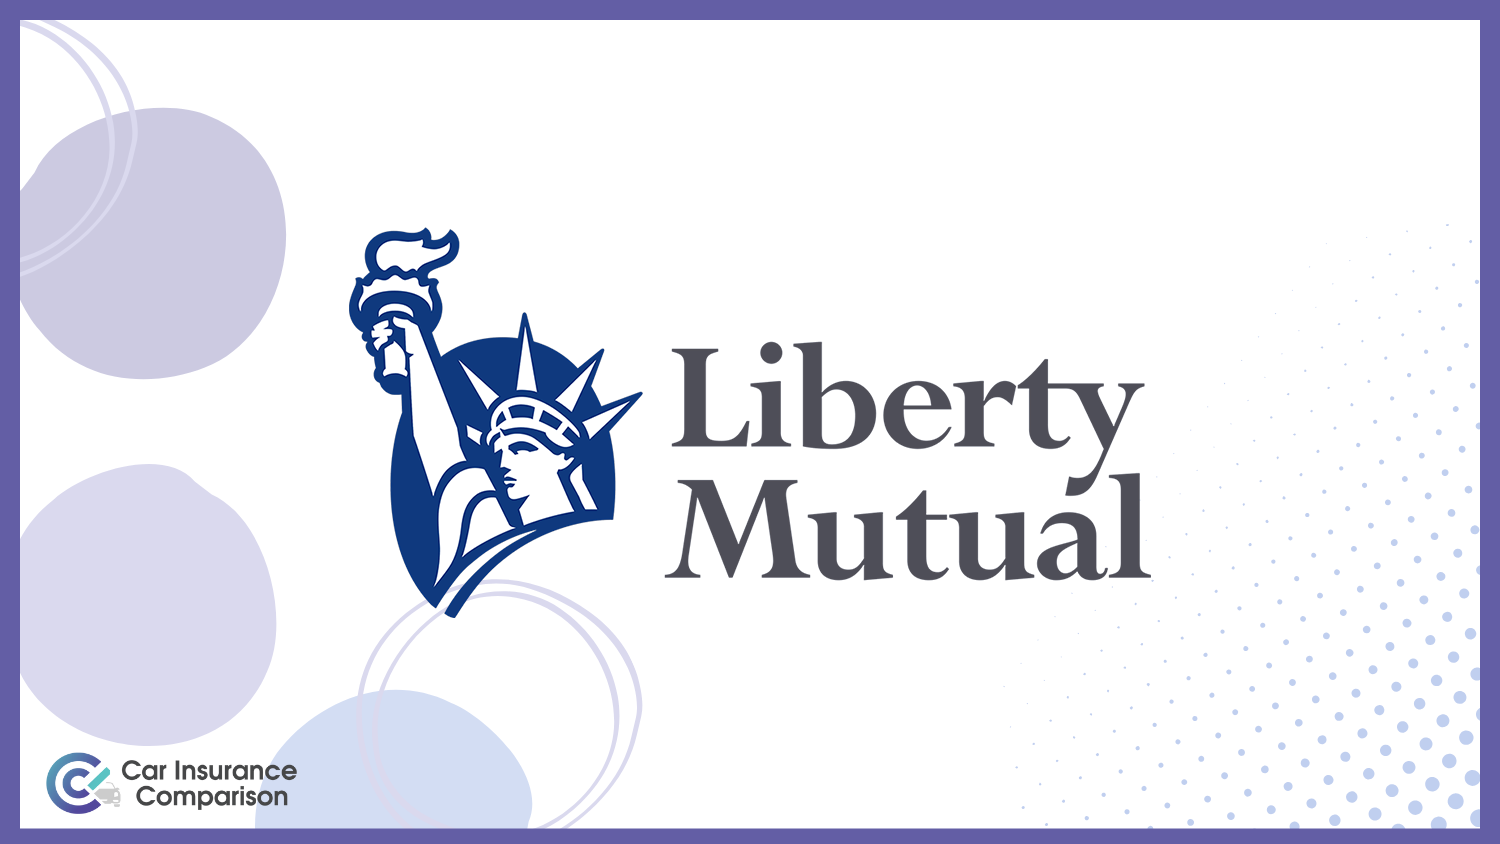 Liberty Mutual: Best Car Insurance for Low-Income Drivers